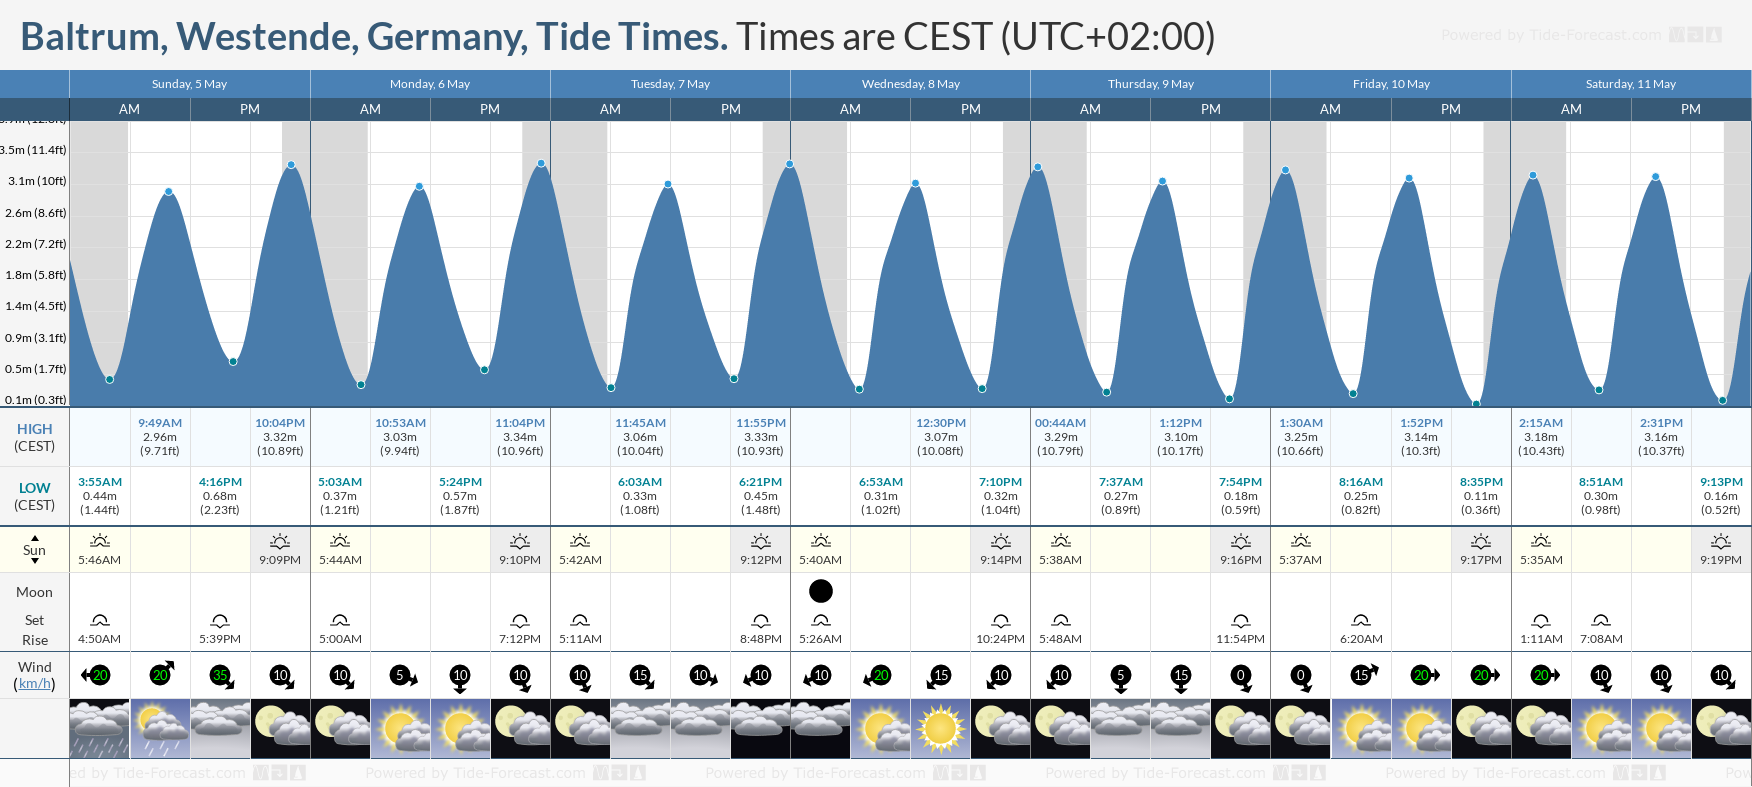 Baltrum, Westende, Germany Tide Chart including high and low tide times for the next 7 days